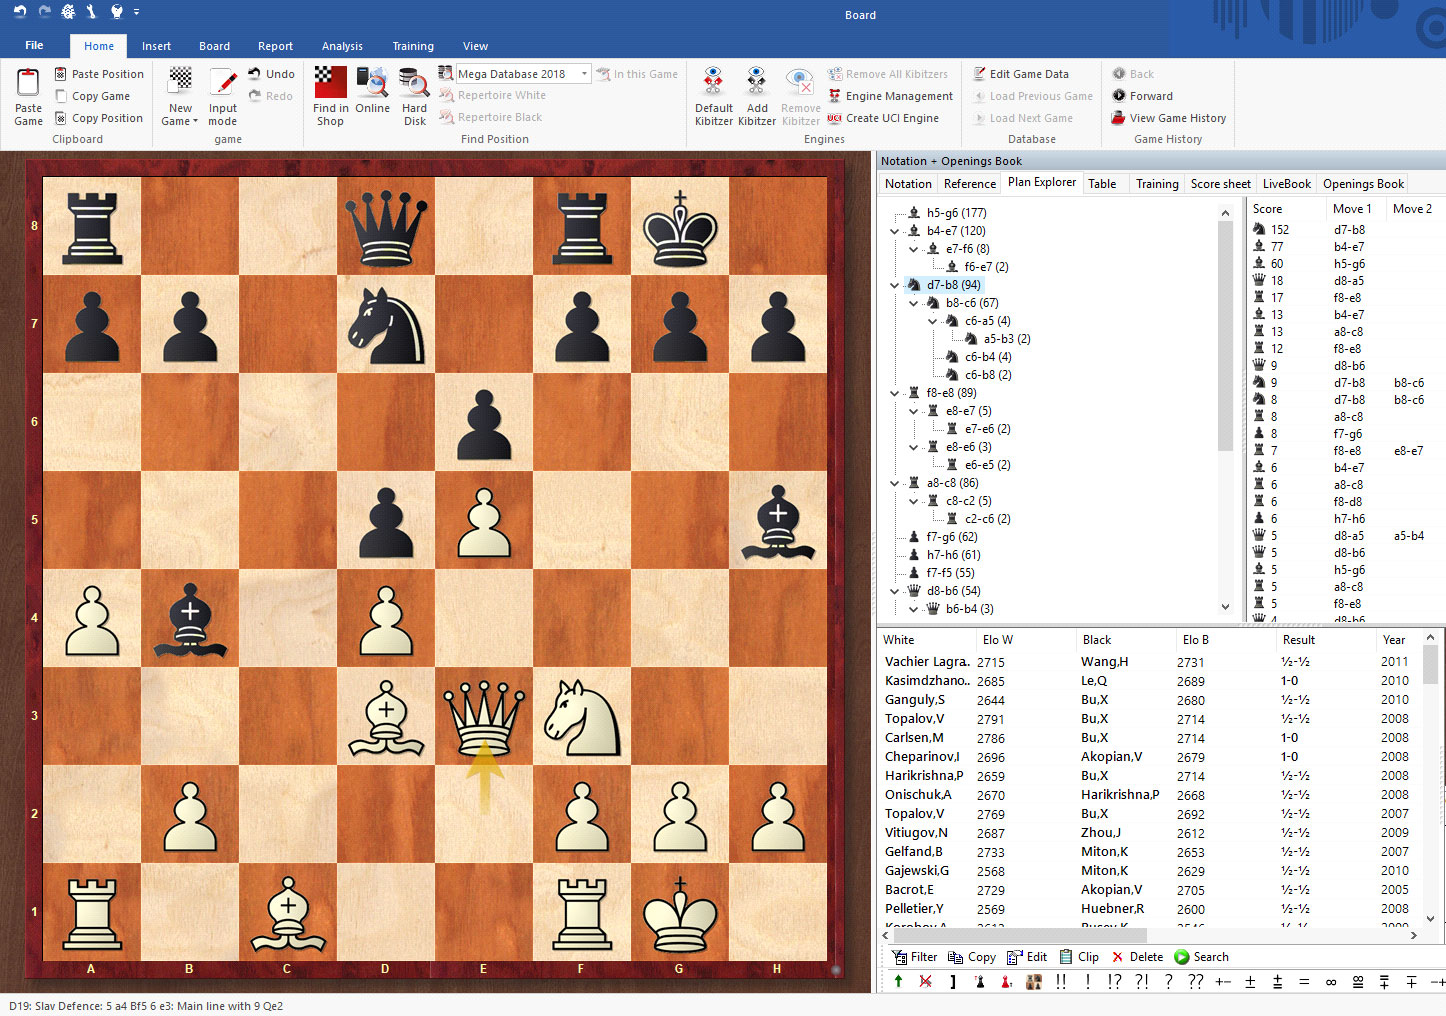 ChessBase 15 Steam Edition System Requirements - Can I Run It